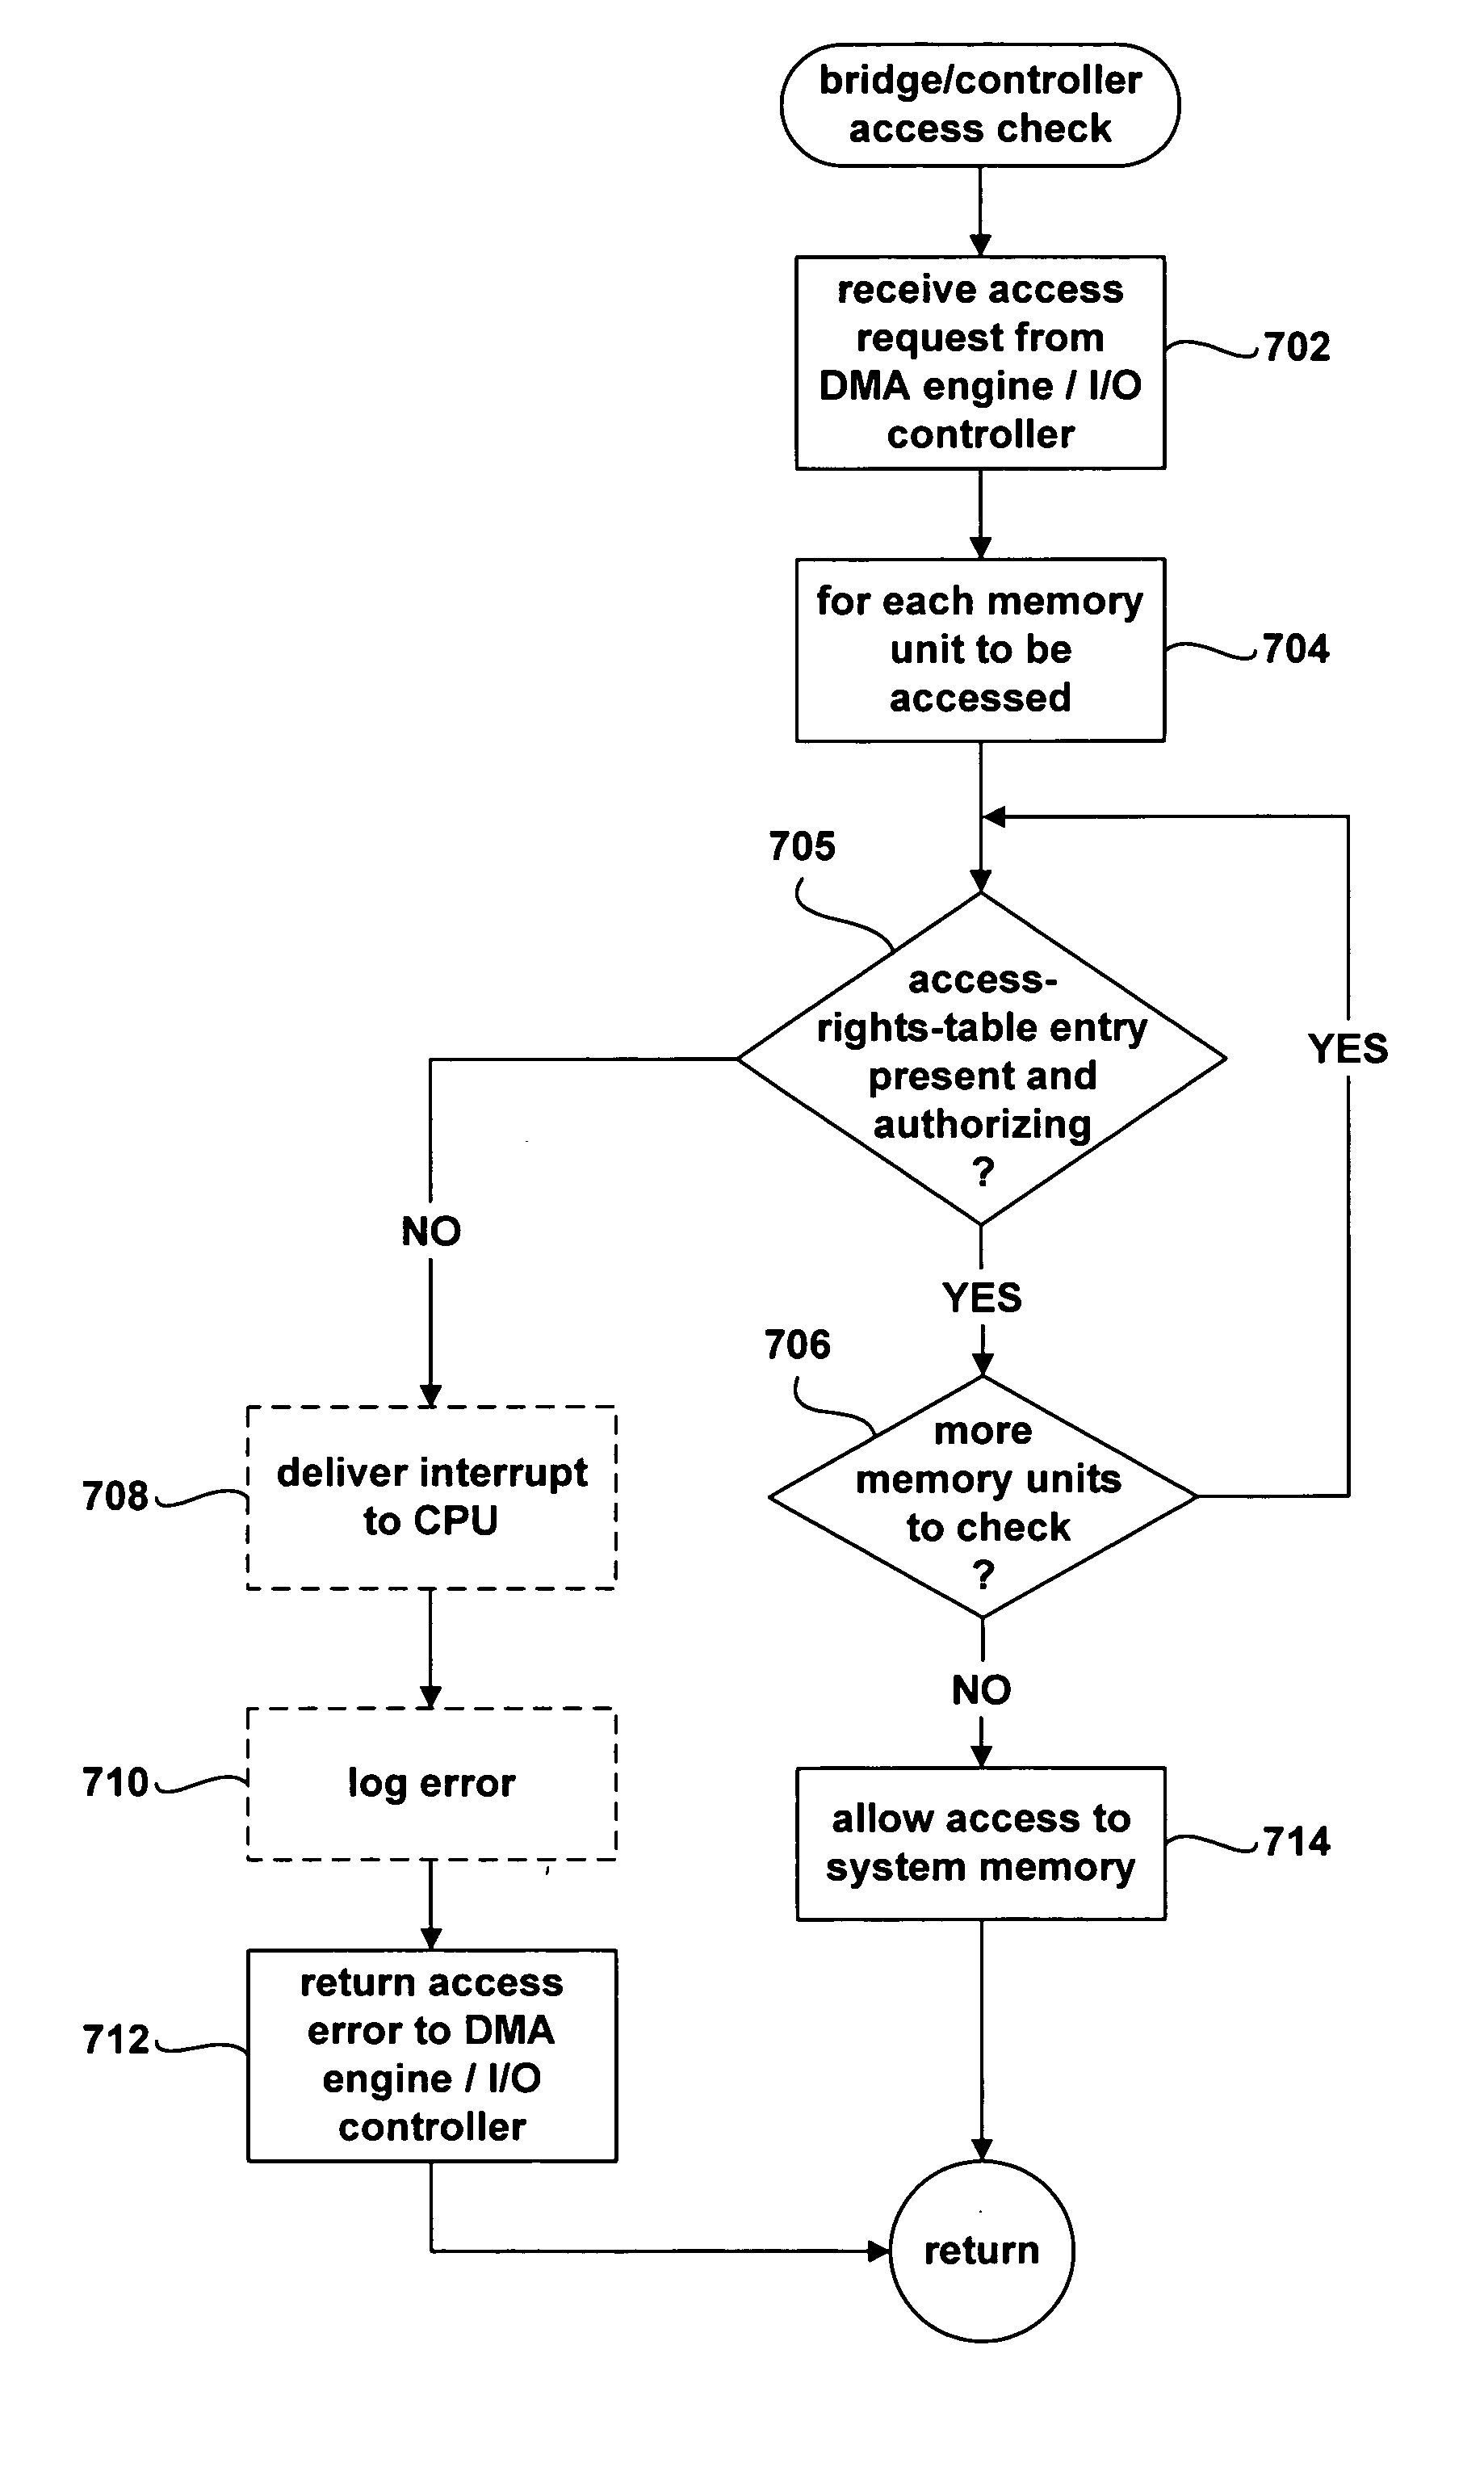 Secure direct memory access through system controllers and similar hardware devices